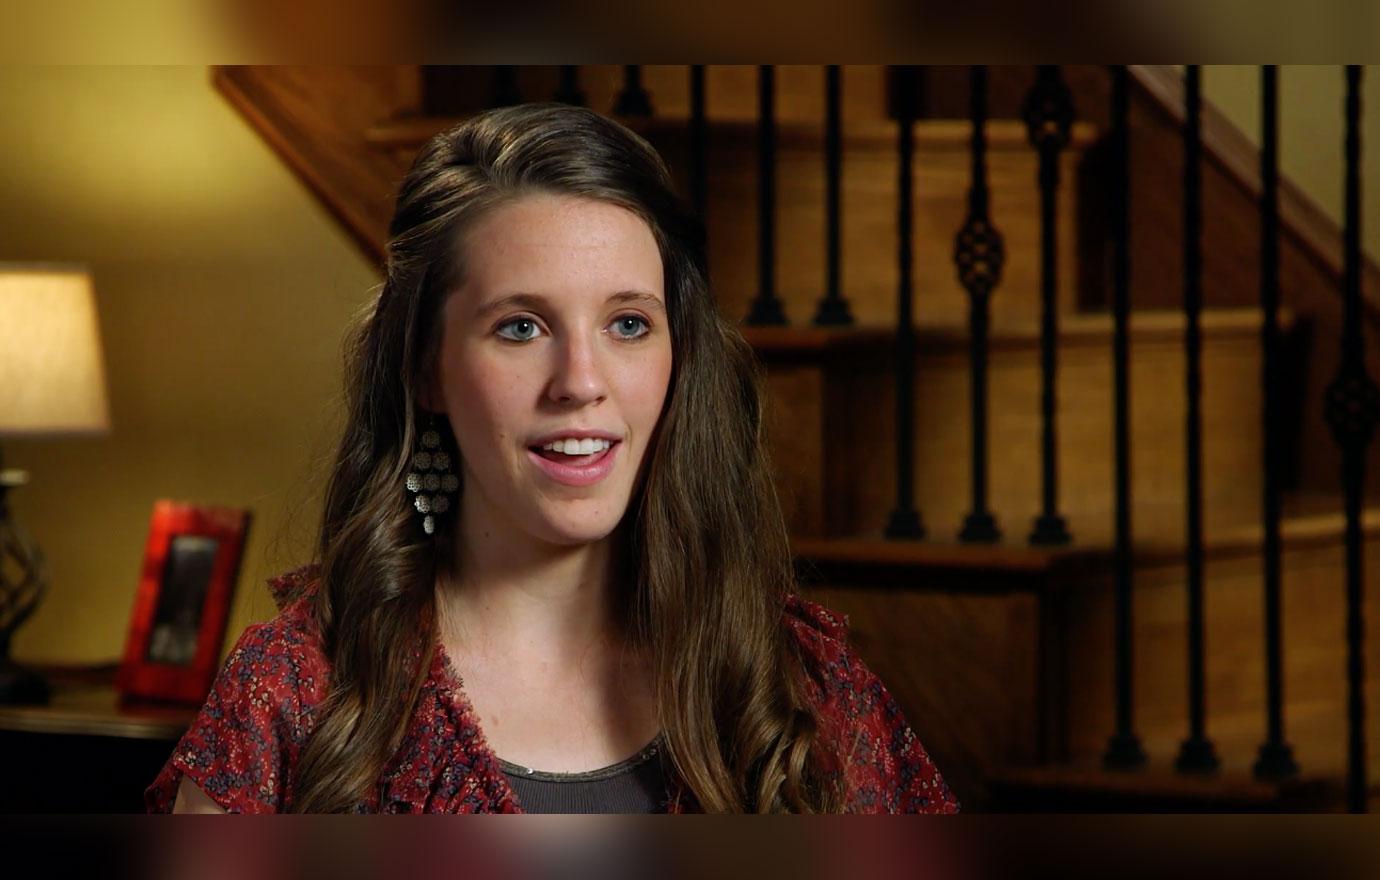 6. Jill Duggar's Blonde Hair Sparks Controversy Among Fans - wide 4